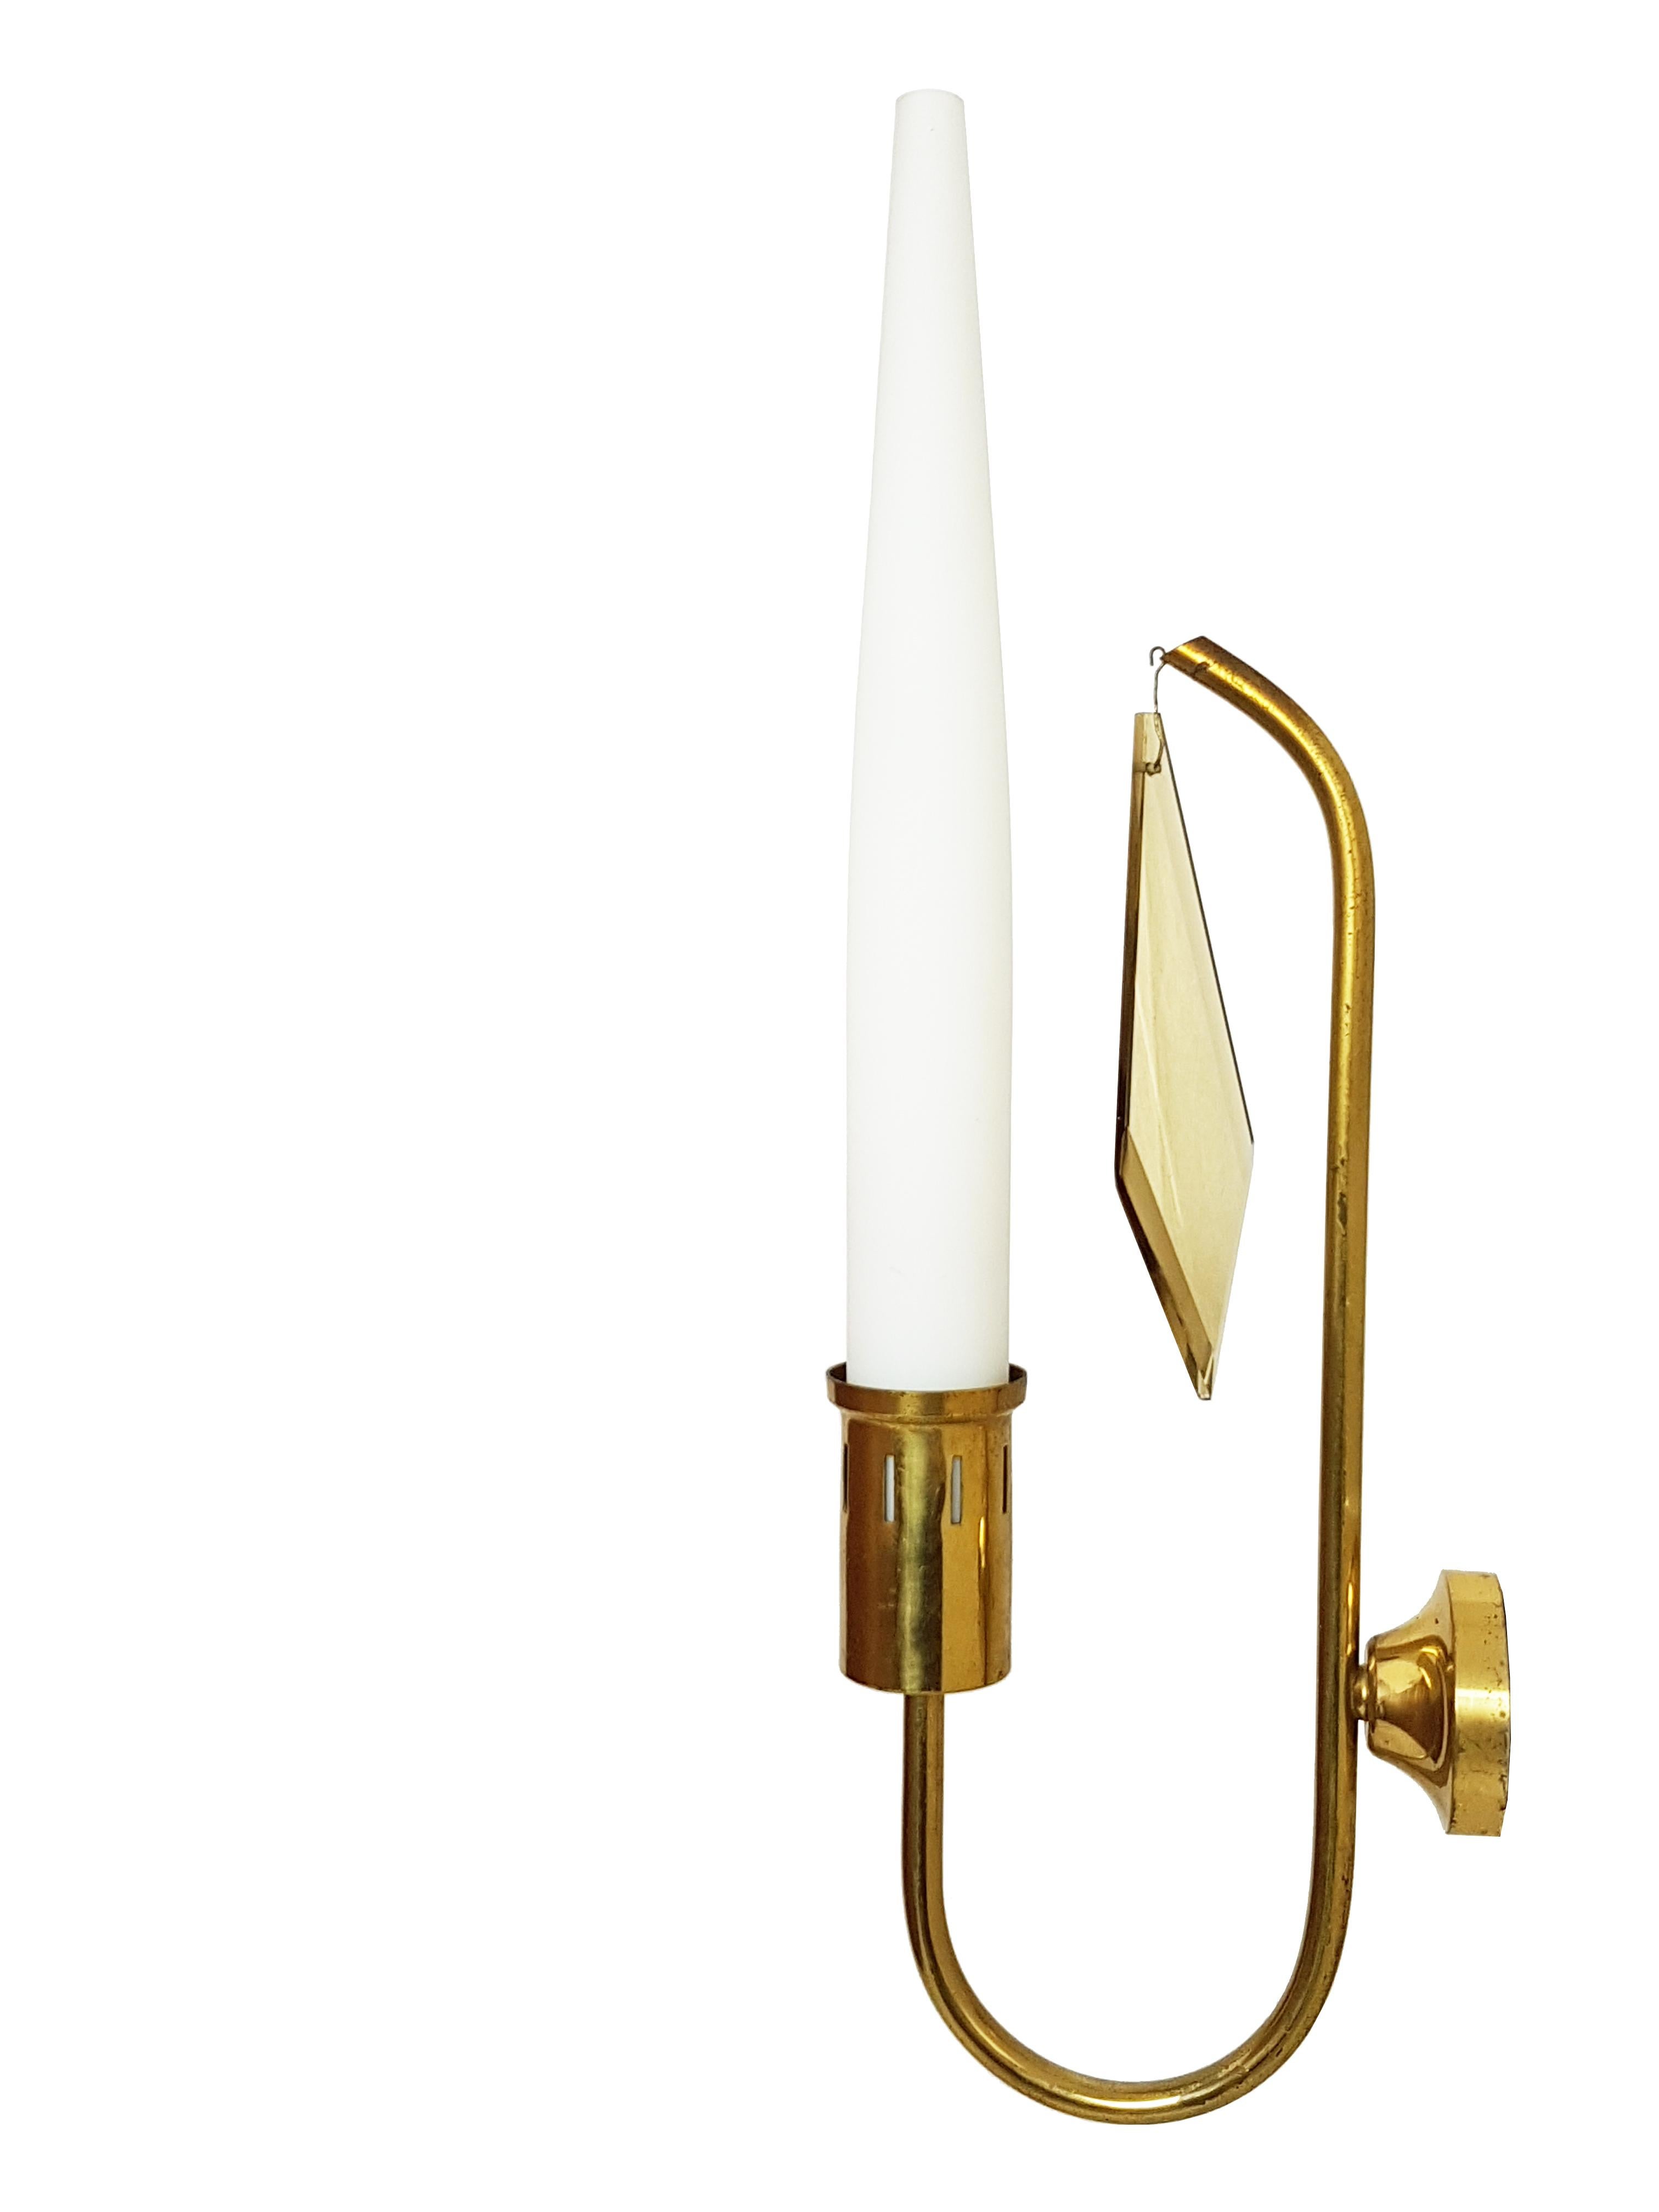 20th Century White Opaline Glass Shade and Brass 1950s Sconces in the Style of Arredoluce